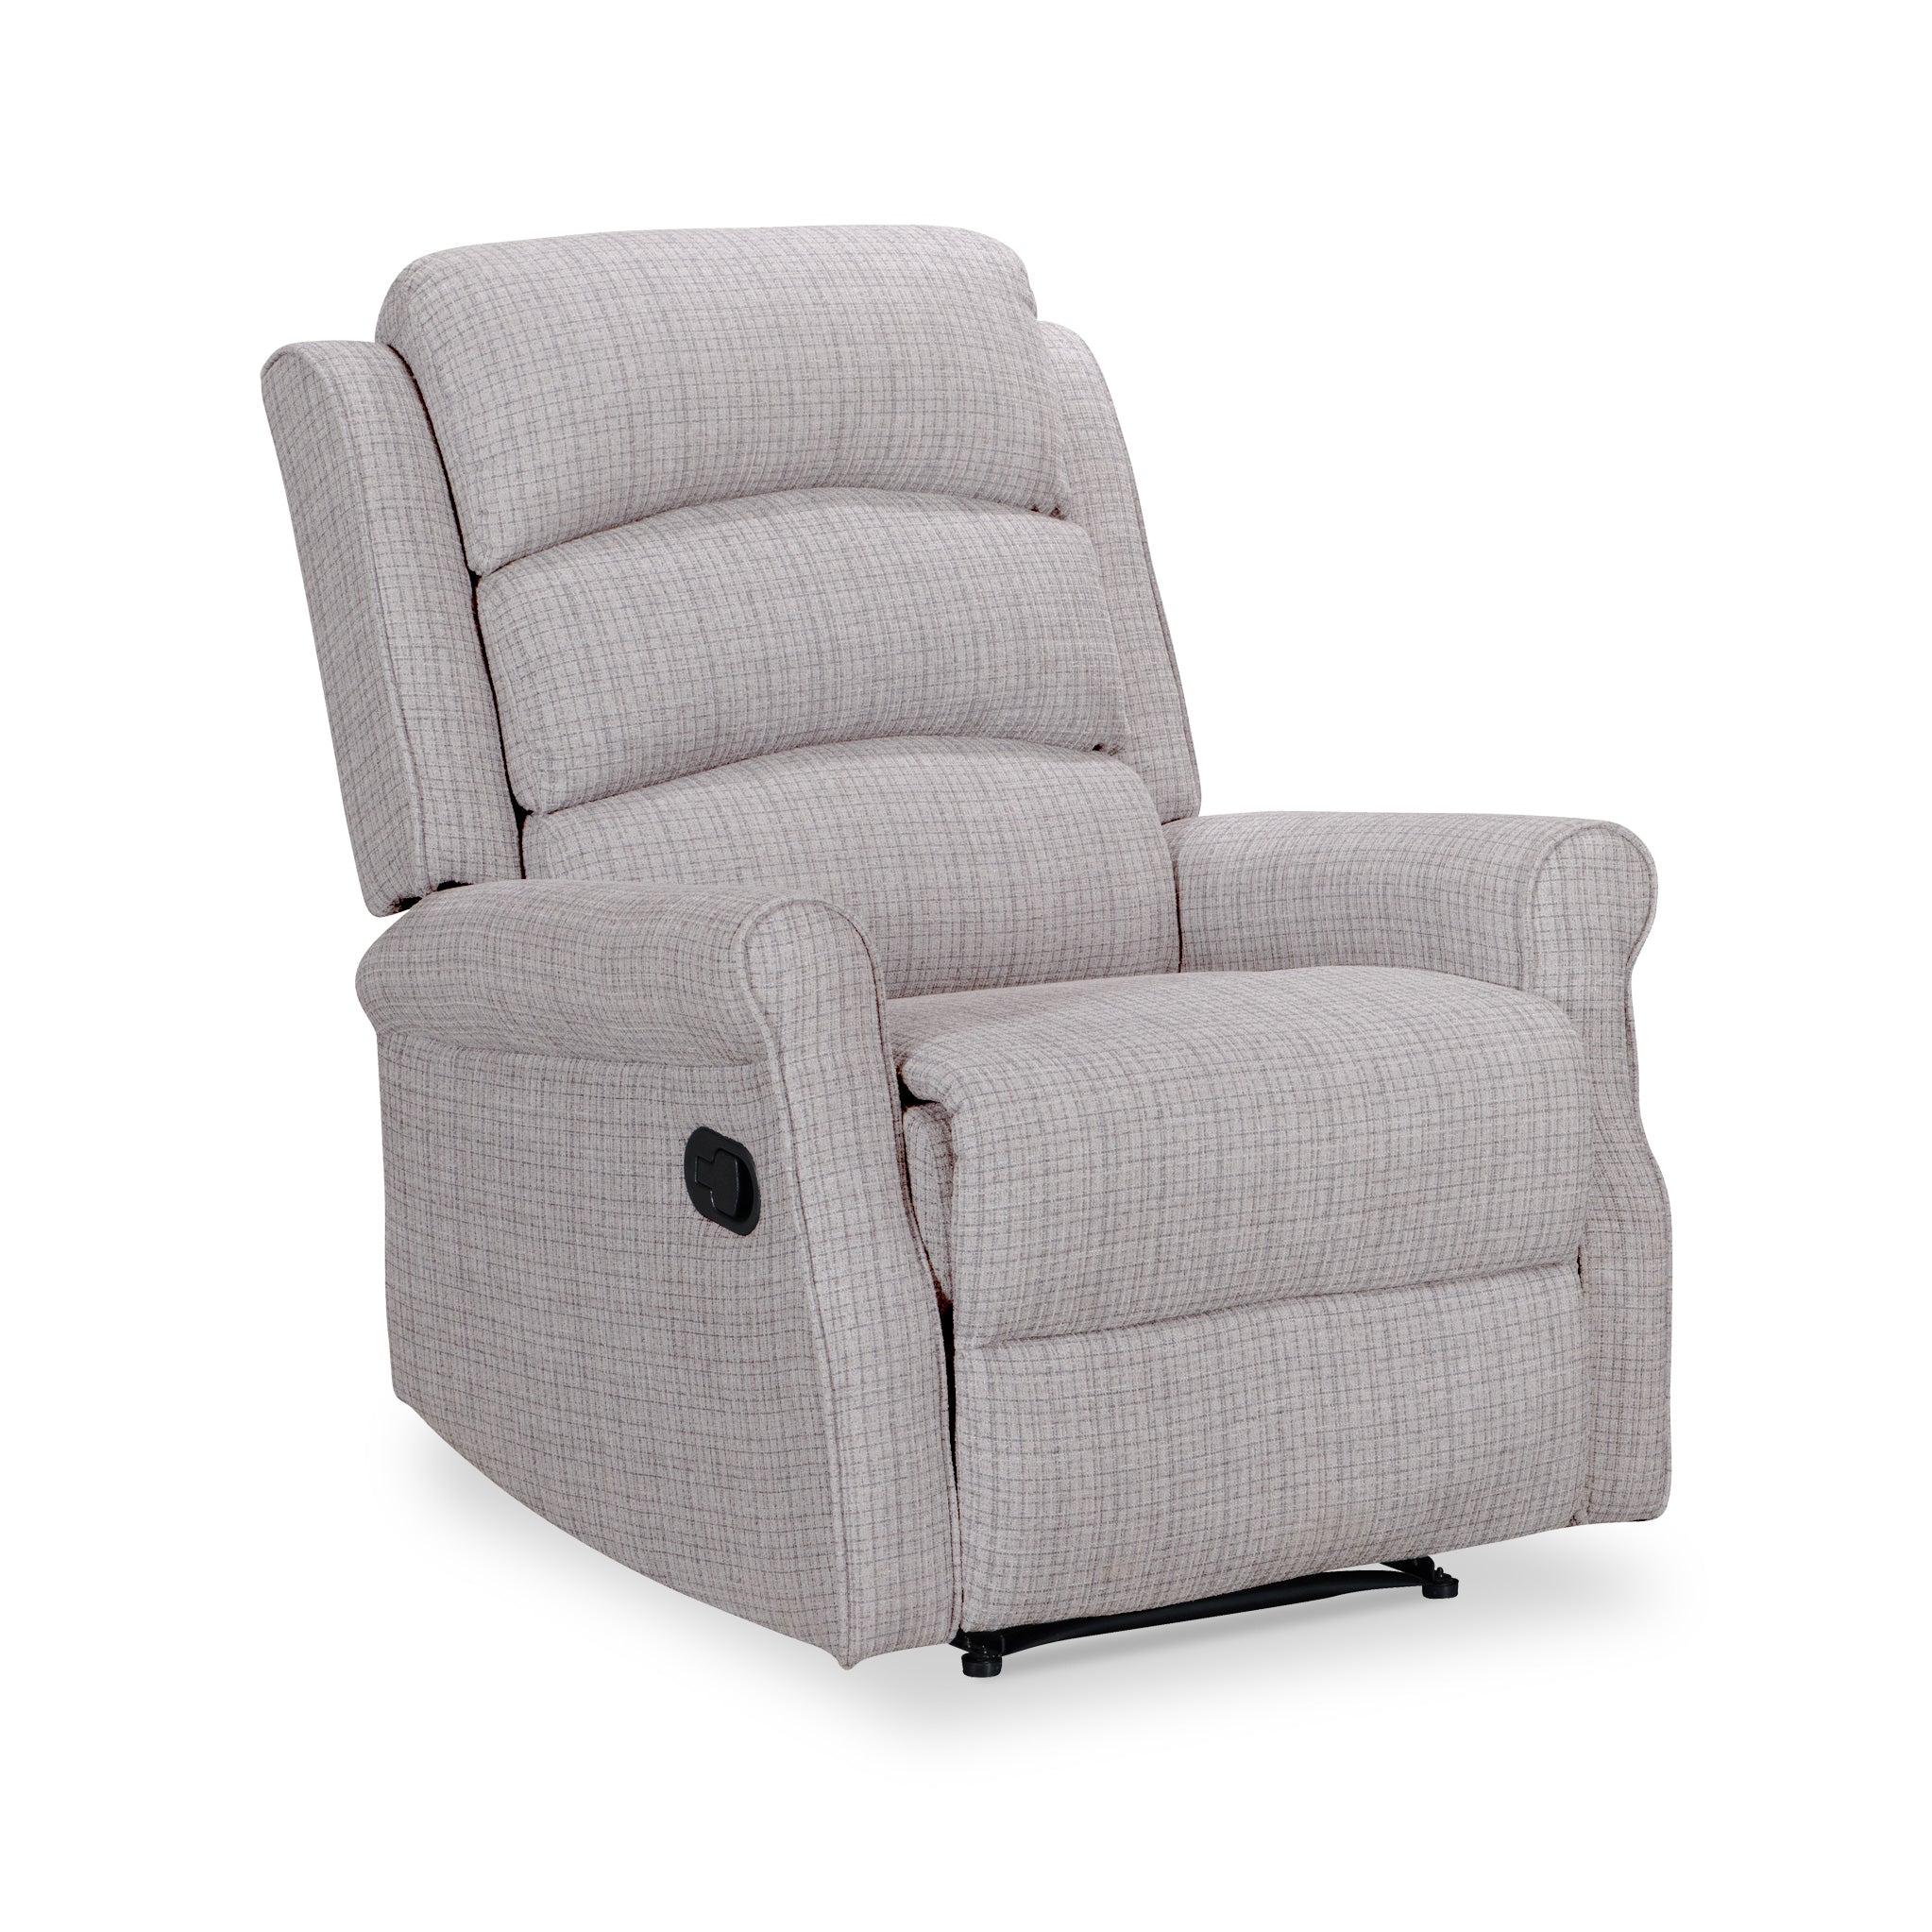 Edwin Manual Recliner Chair Grey Or Natural Beige Faux Wool Armchair